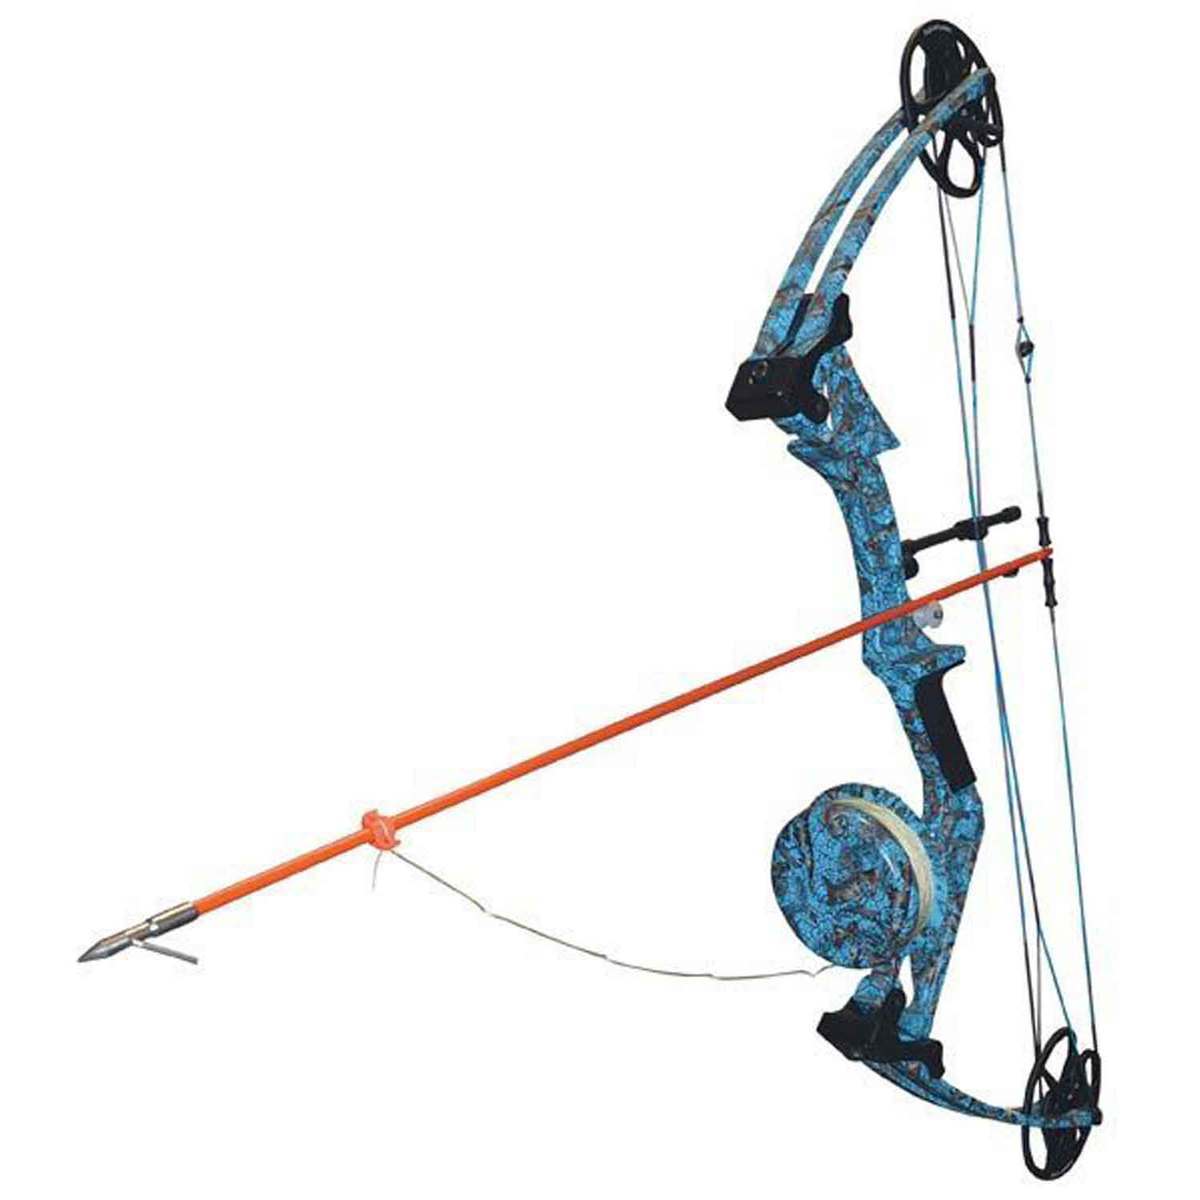 Archery Bowfishing Reel Bow Fishing Reels Kits Hunting Rope Bow Hunting  Recurve Compound Bow and Arrow Accessories Spincast Reel